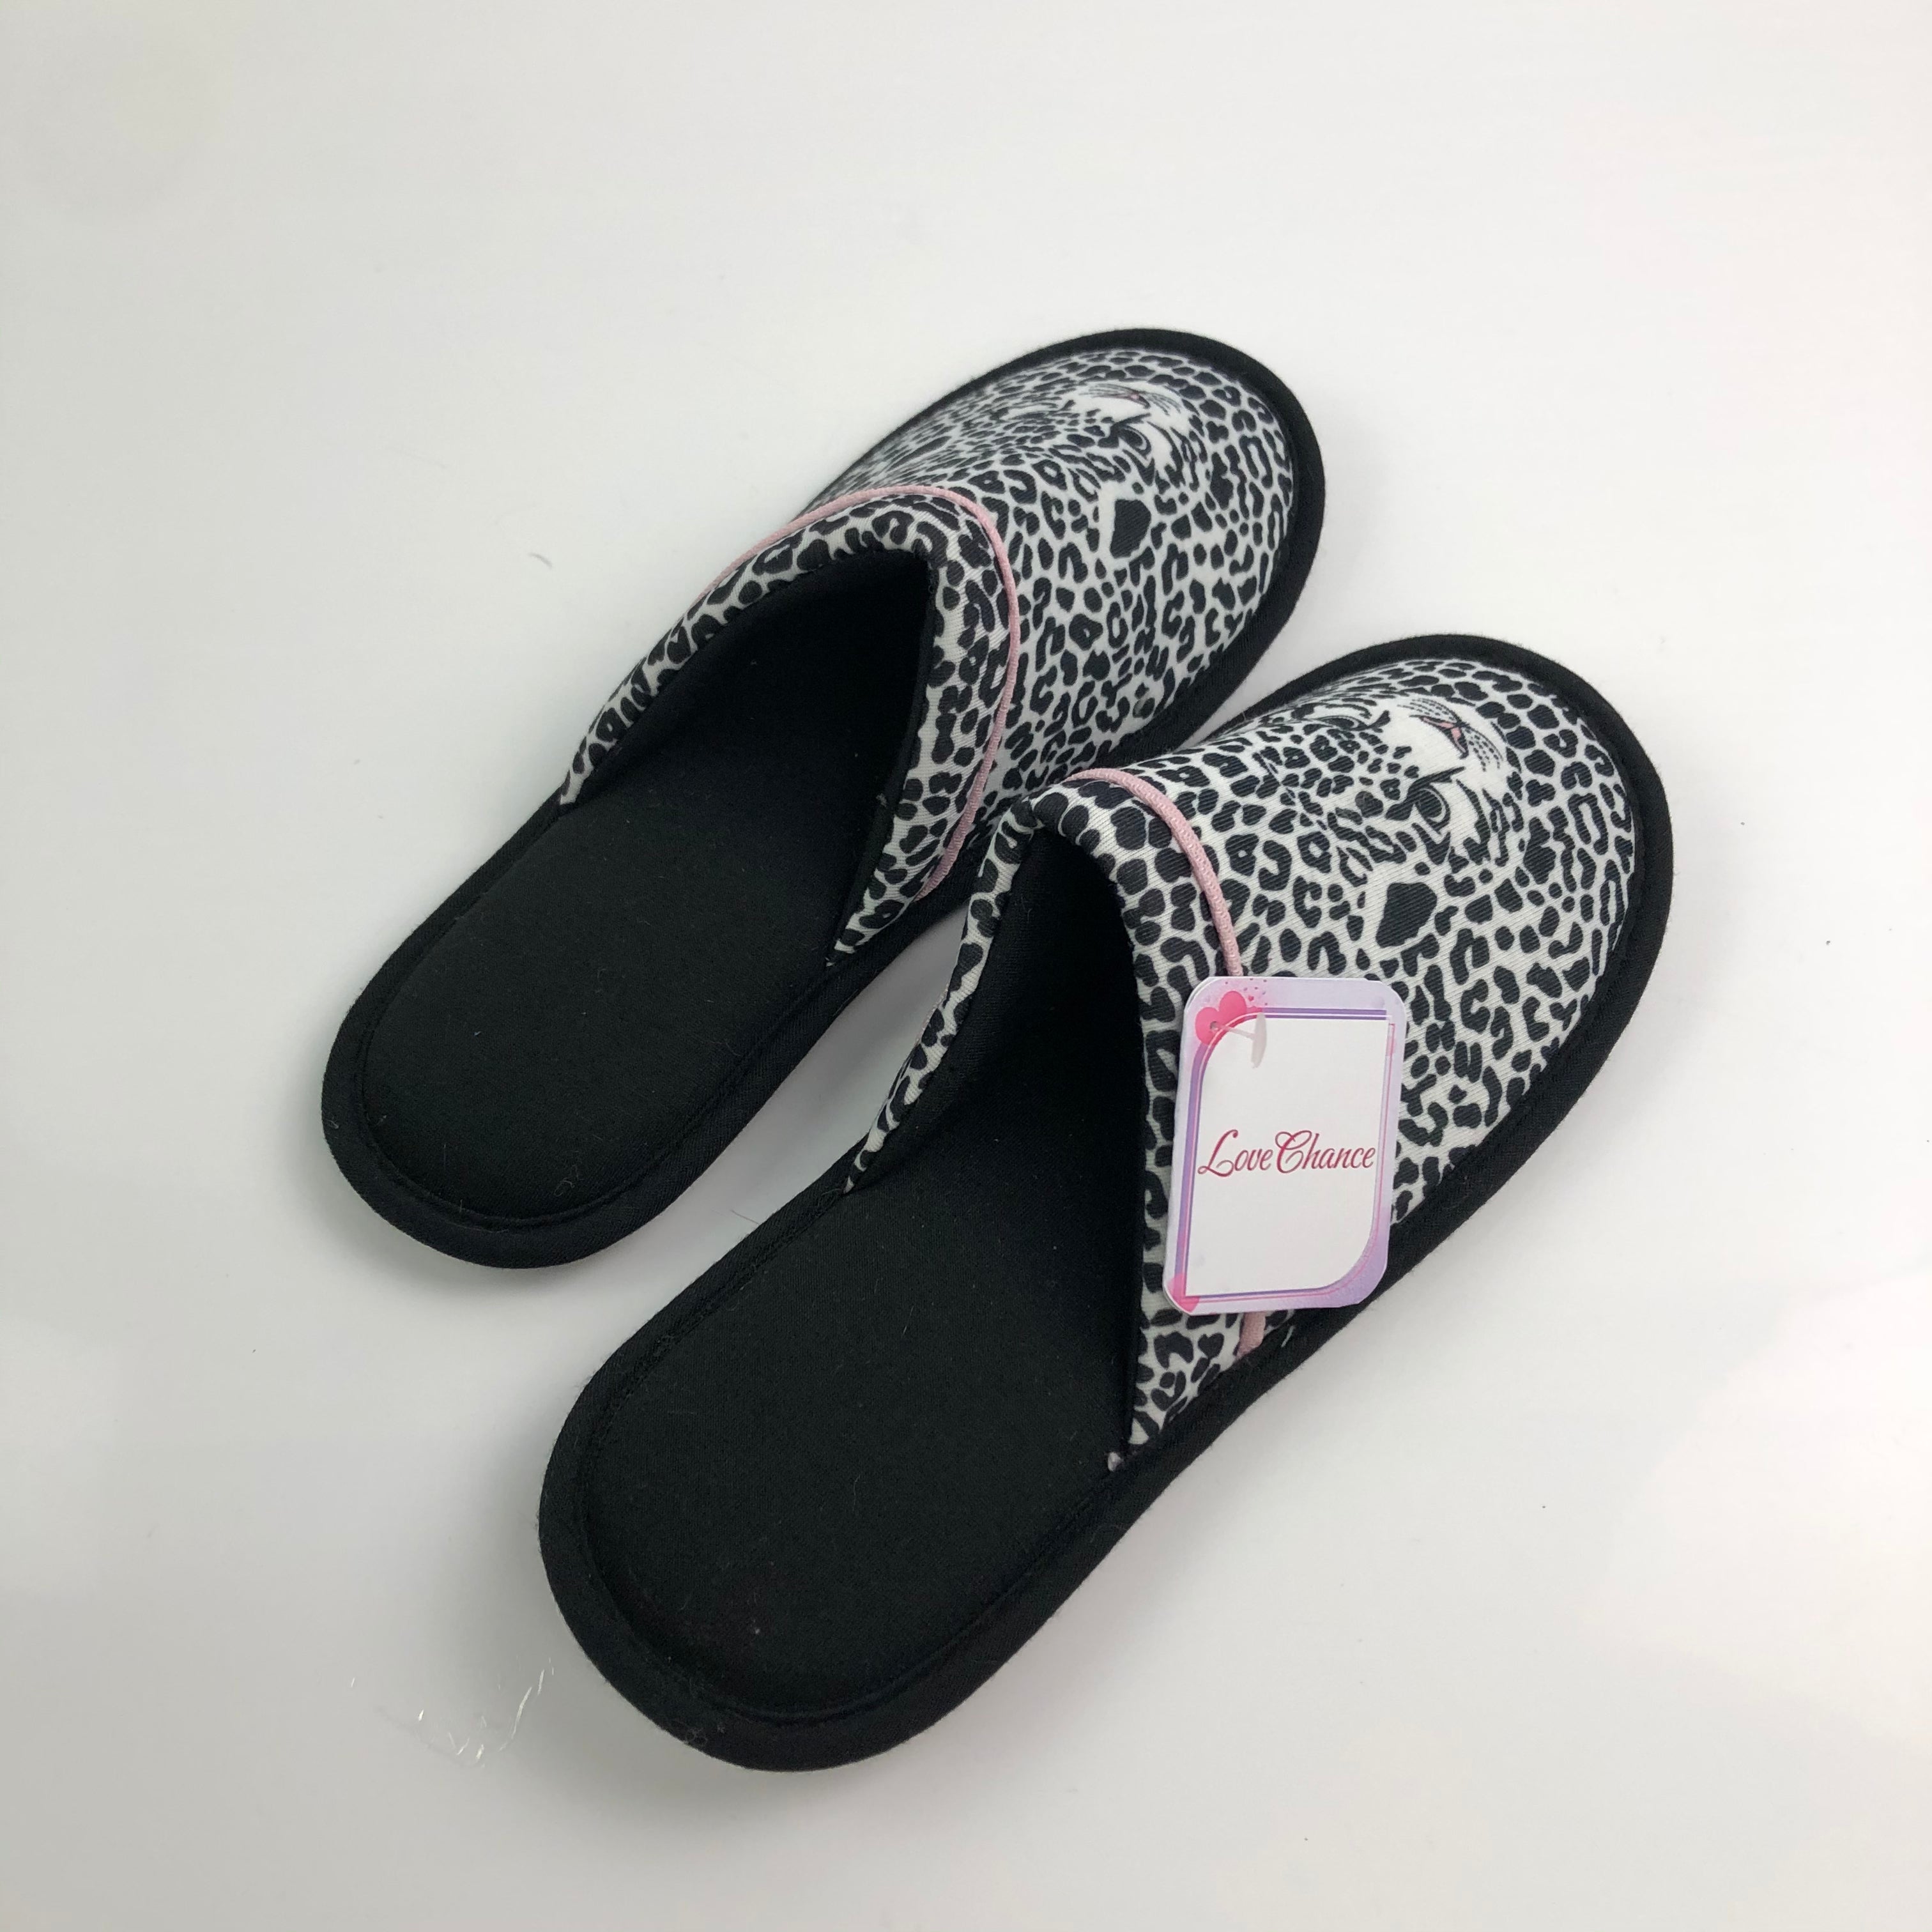 LoveChance Women's Comfy Slippers - Glow Guards